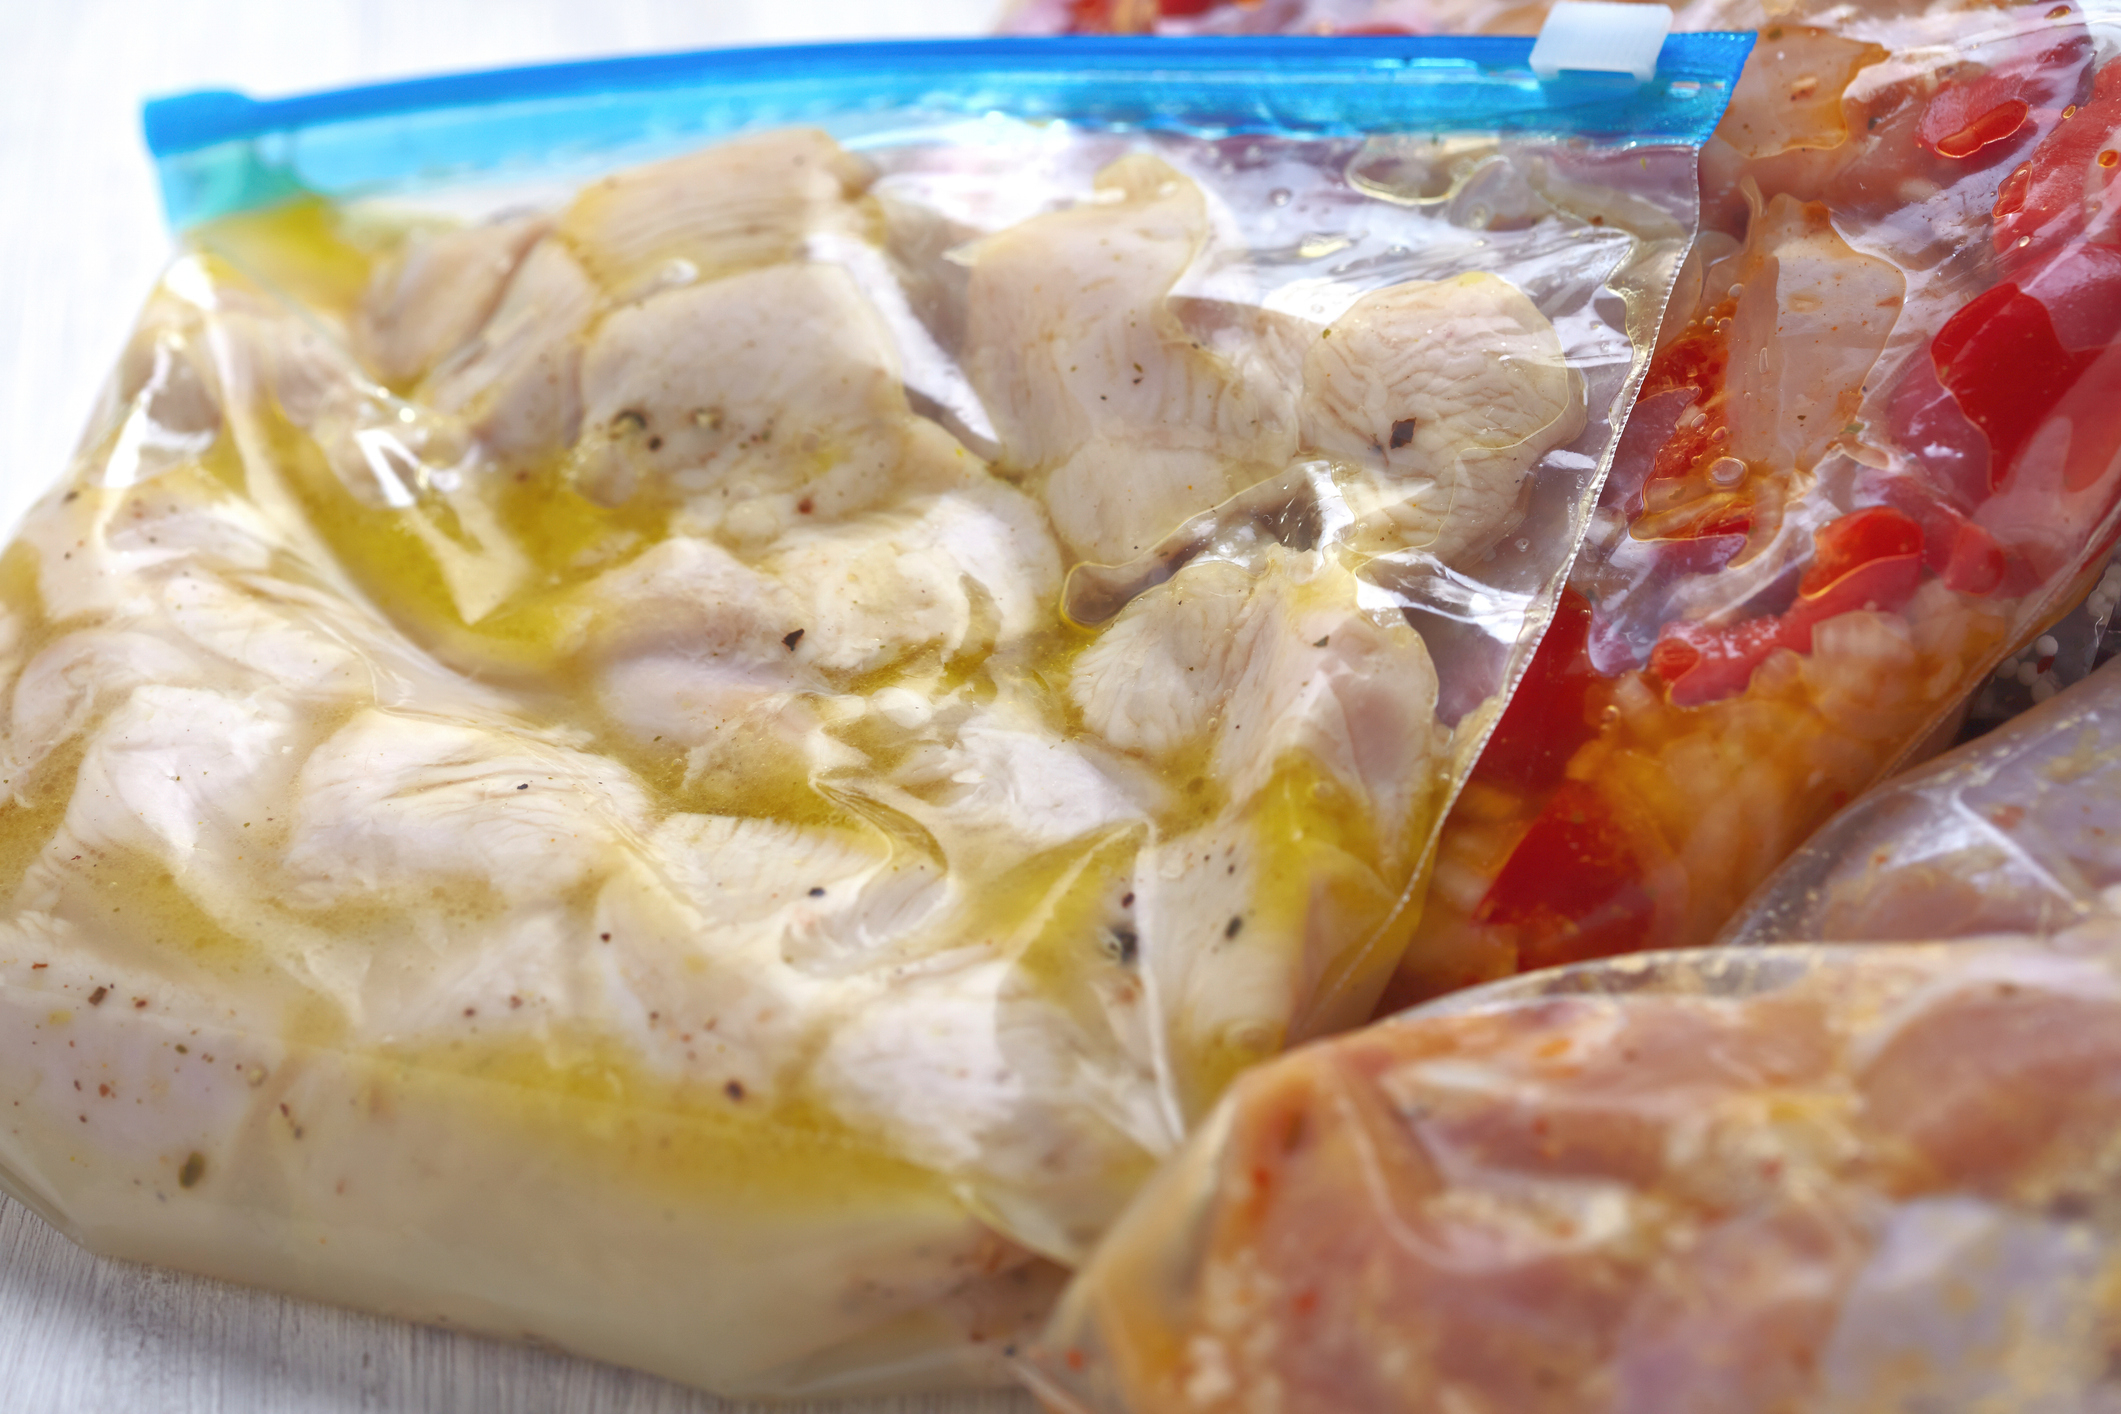 Chicken and vegetables marinated in separate sealed plastic bags, ready for cooking